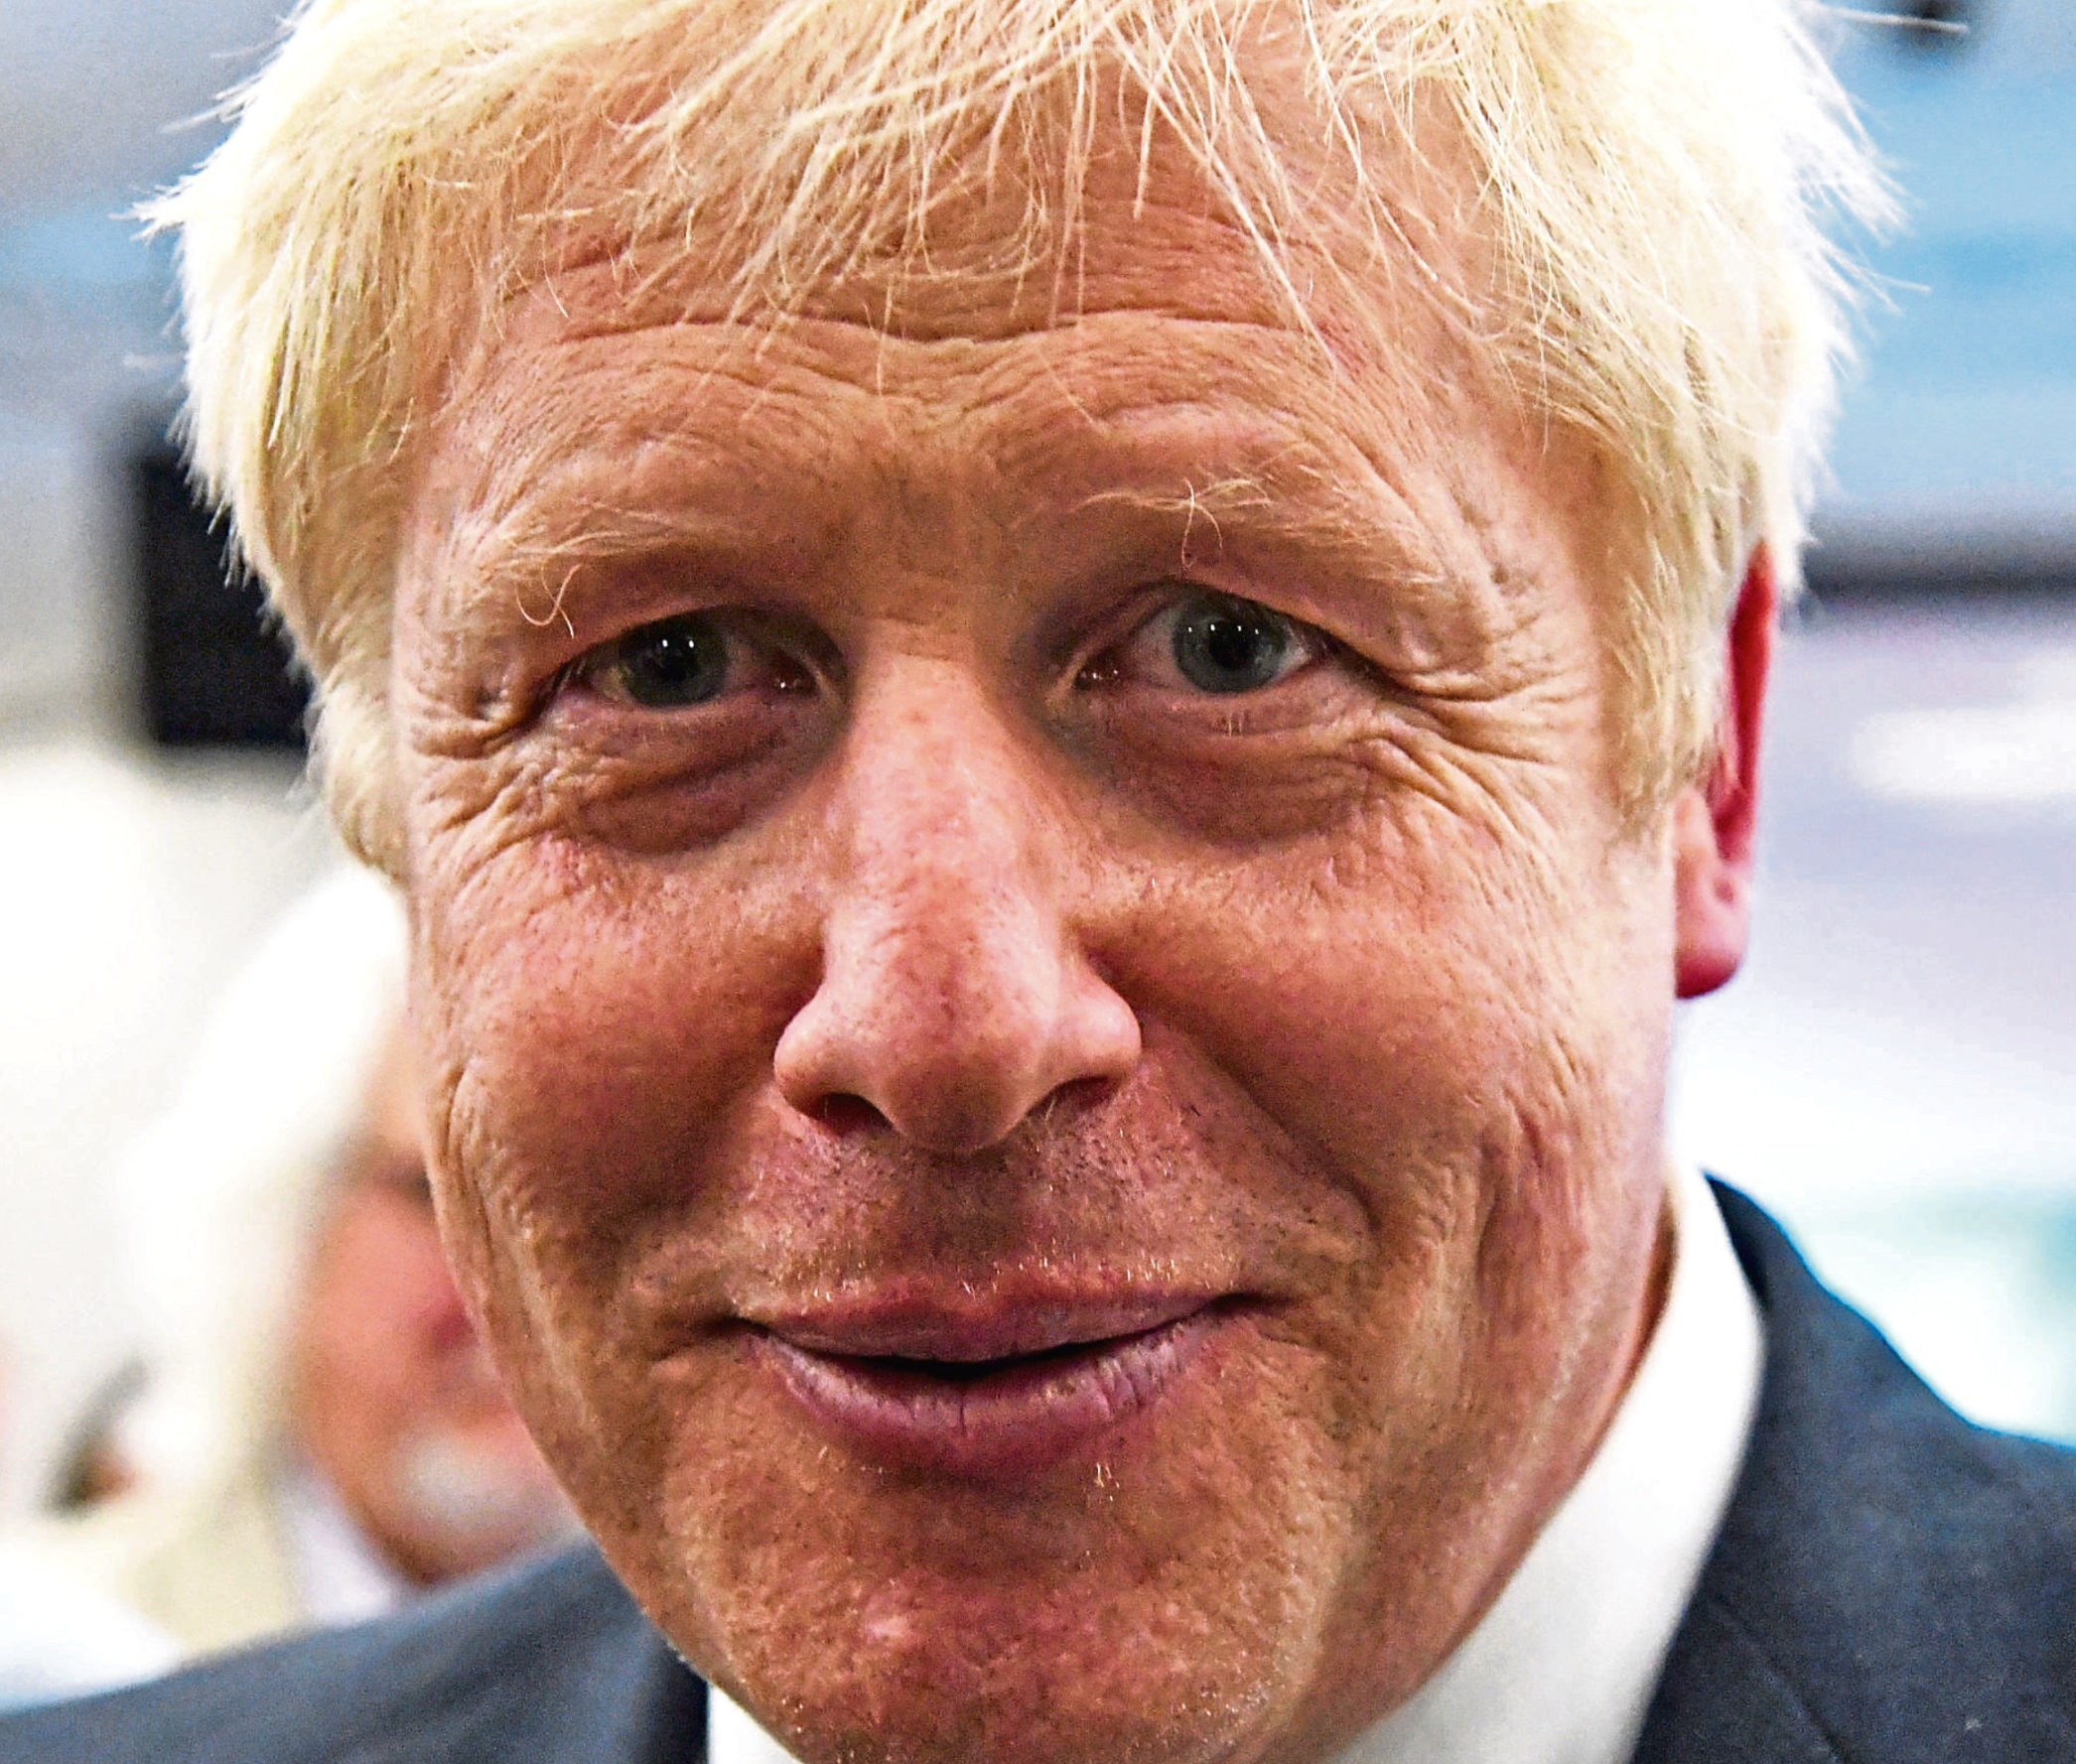 Boris Johnson has been announced as the new prime minister of the UK.